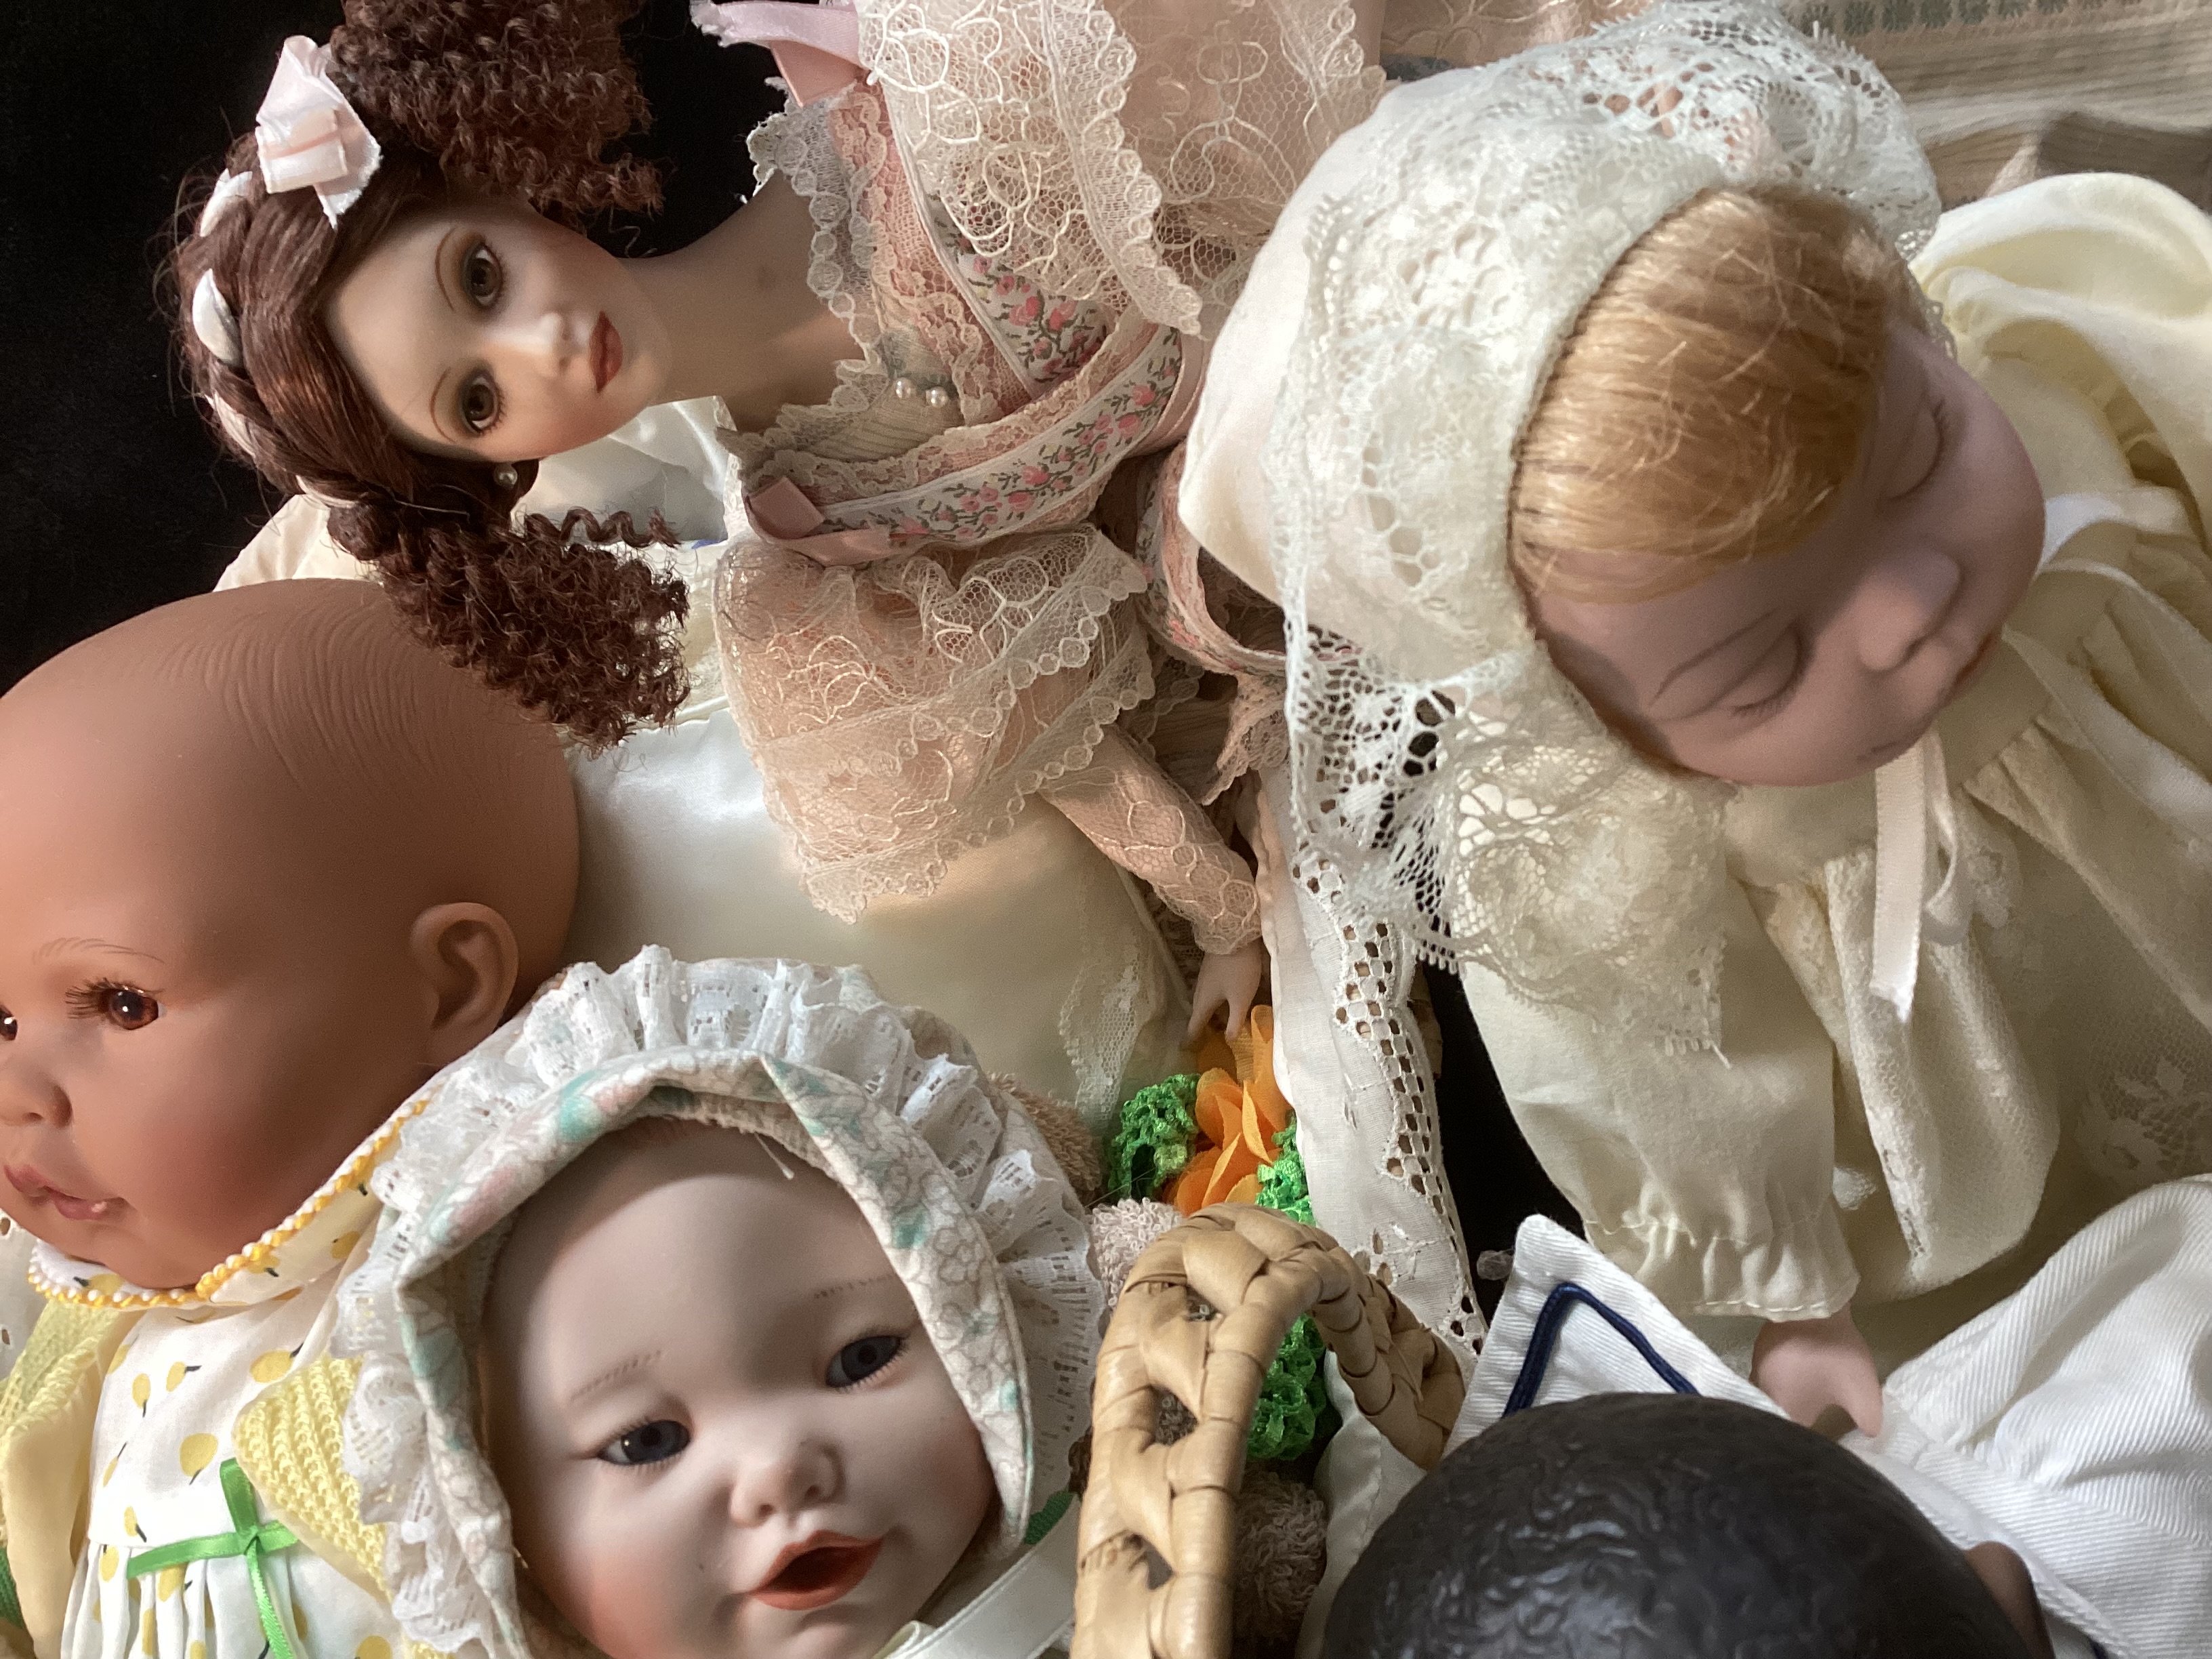 Vintage Artist Modern Porcelain and vinyl collection of dolls and baby dolls all dressed in a willow - Image 2 of 3